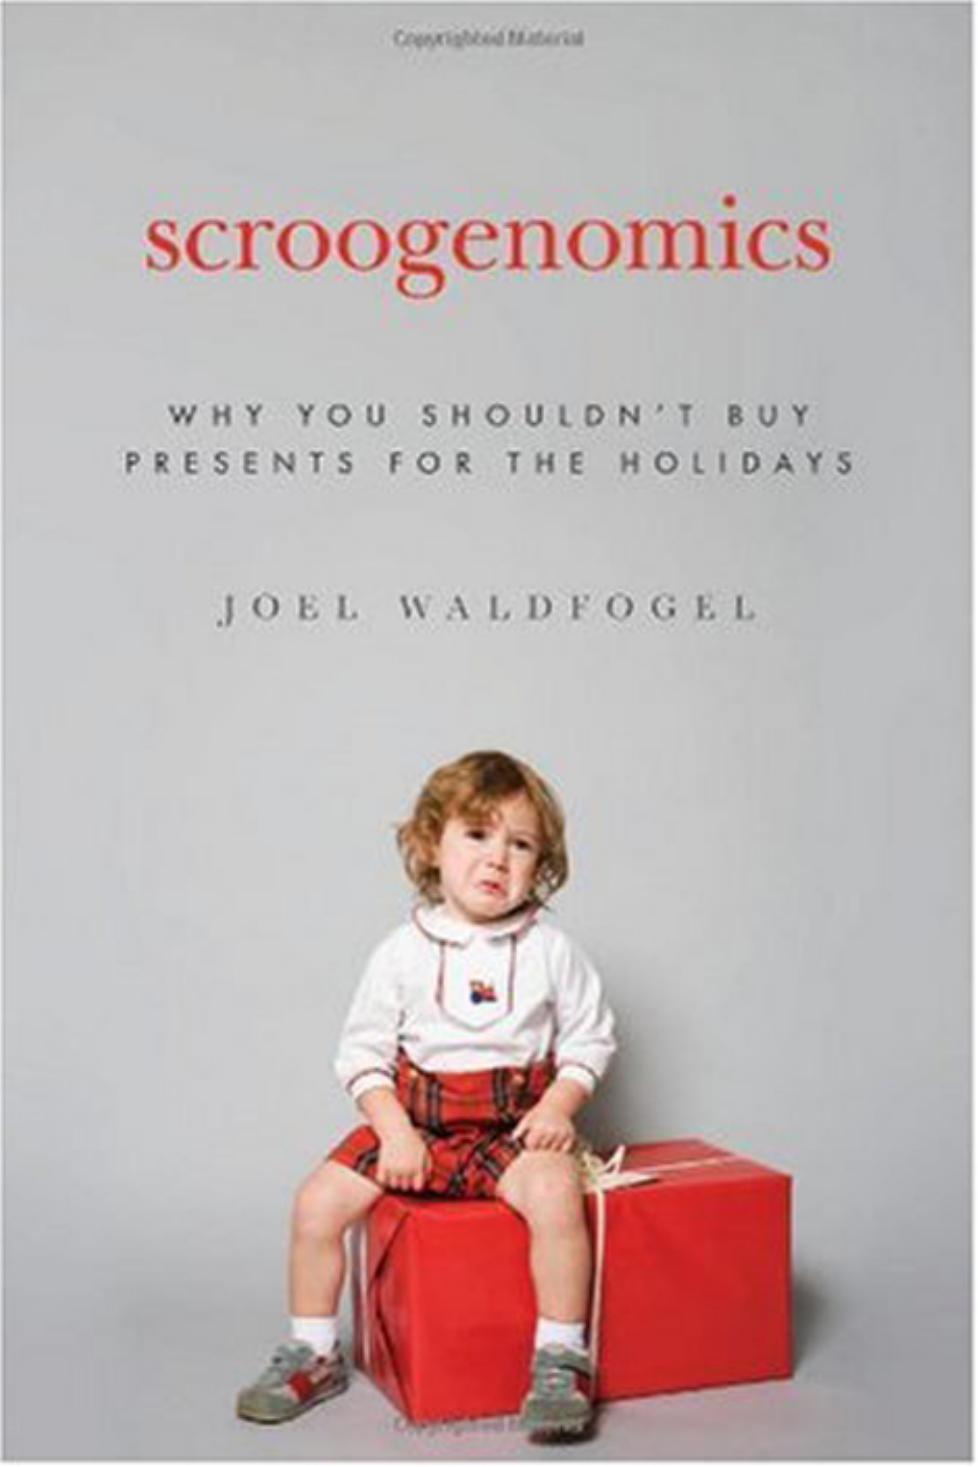 Scroogenomics: Why You Shouldn't Buy Presents for the Holidays by Joel Waldfogel